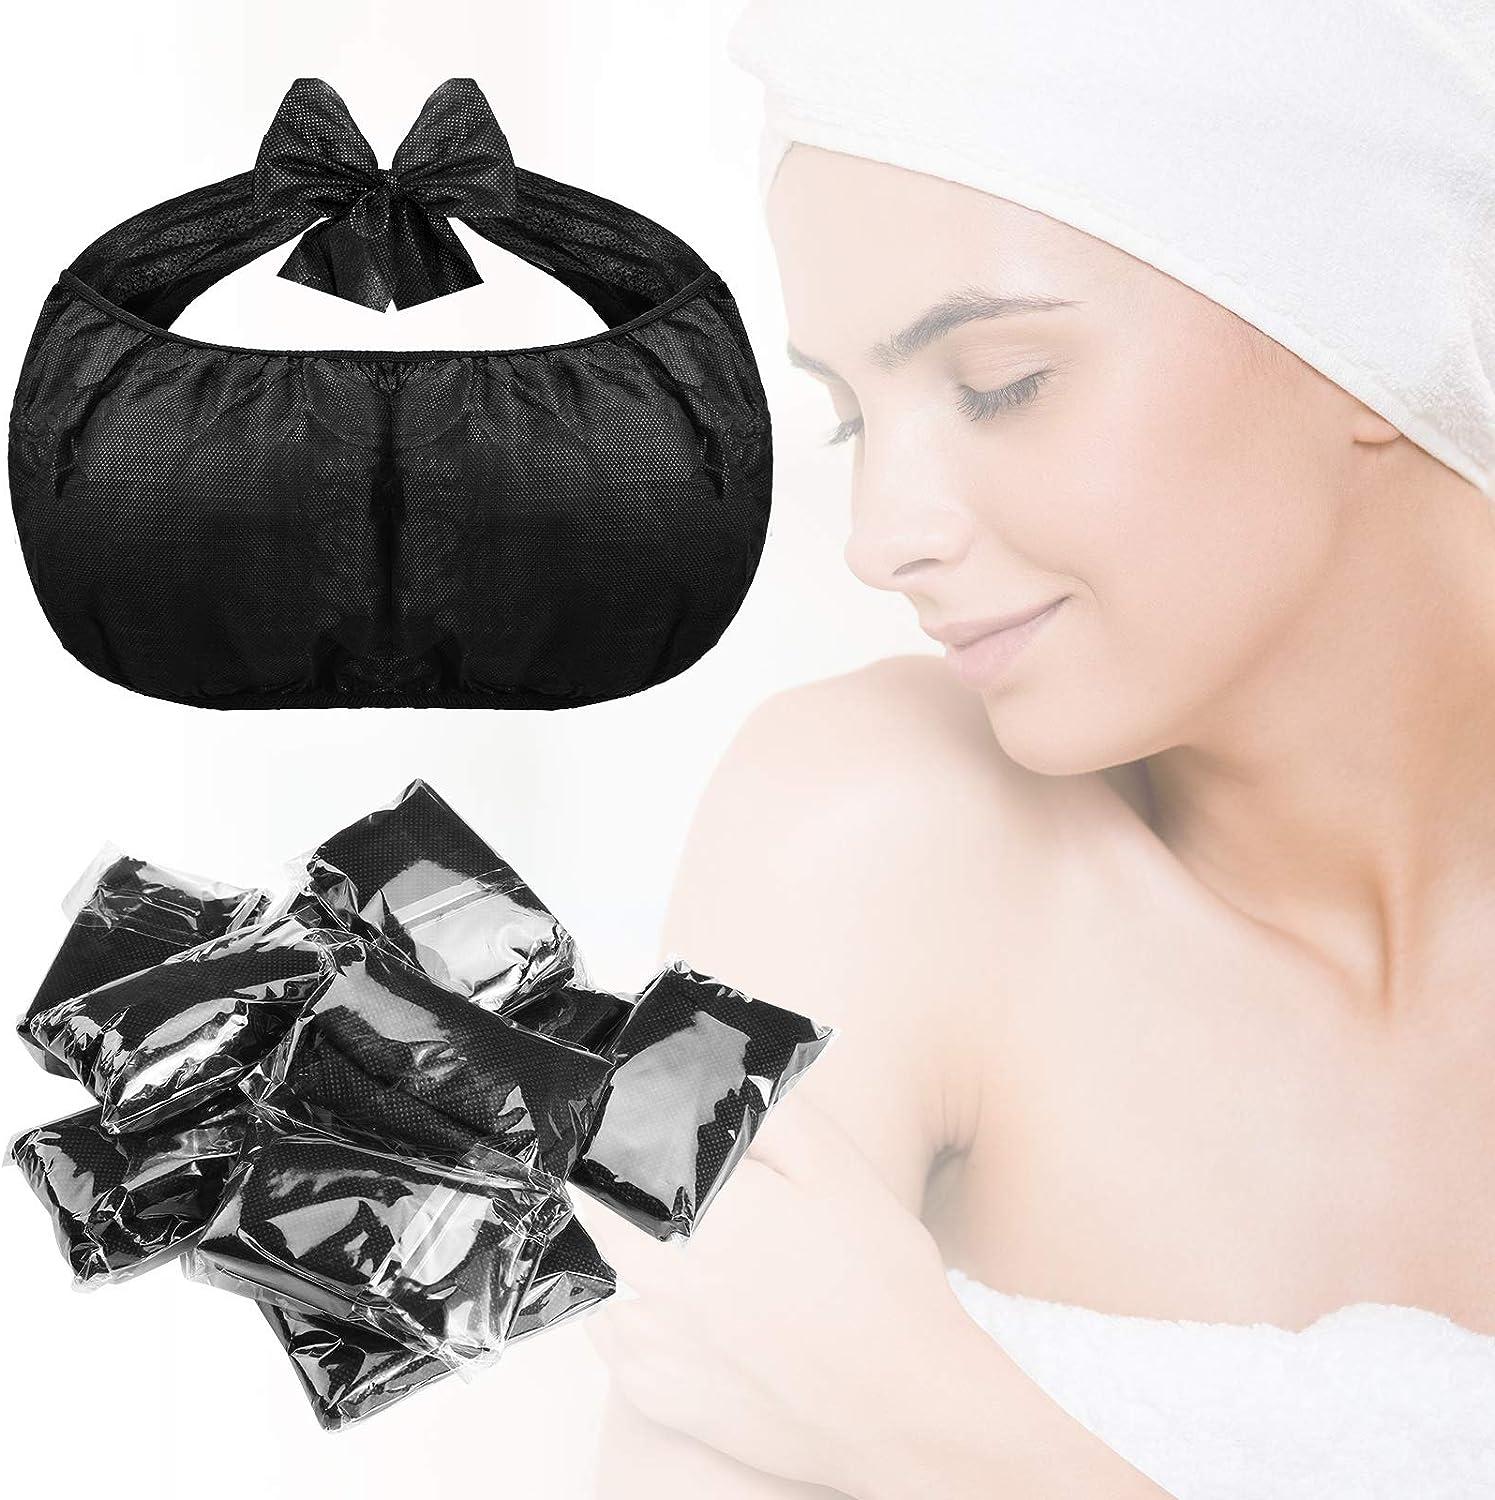 APPEARUS 50 Ct. Disposable Bras - Women's Backless Spa Bra for